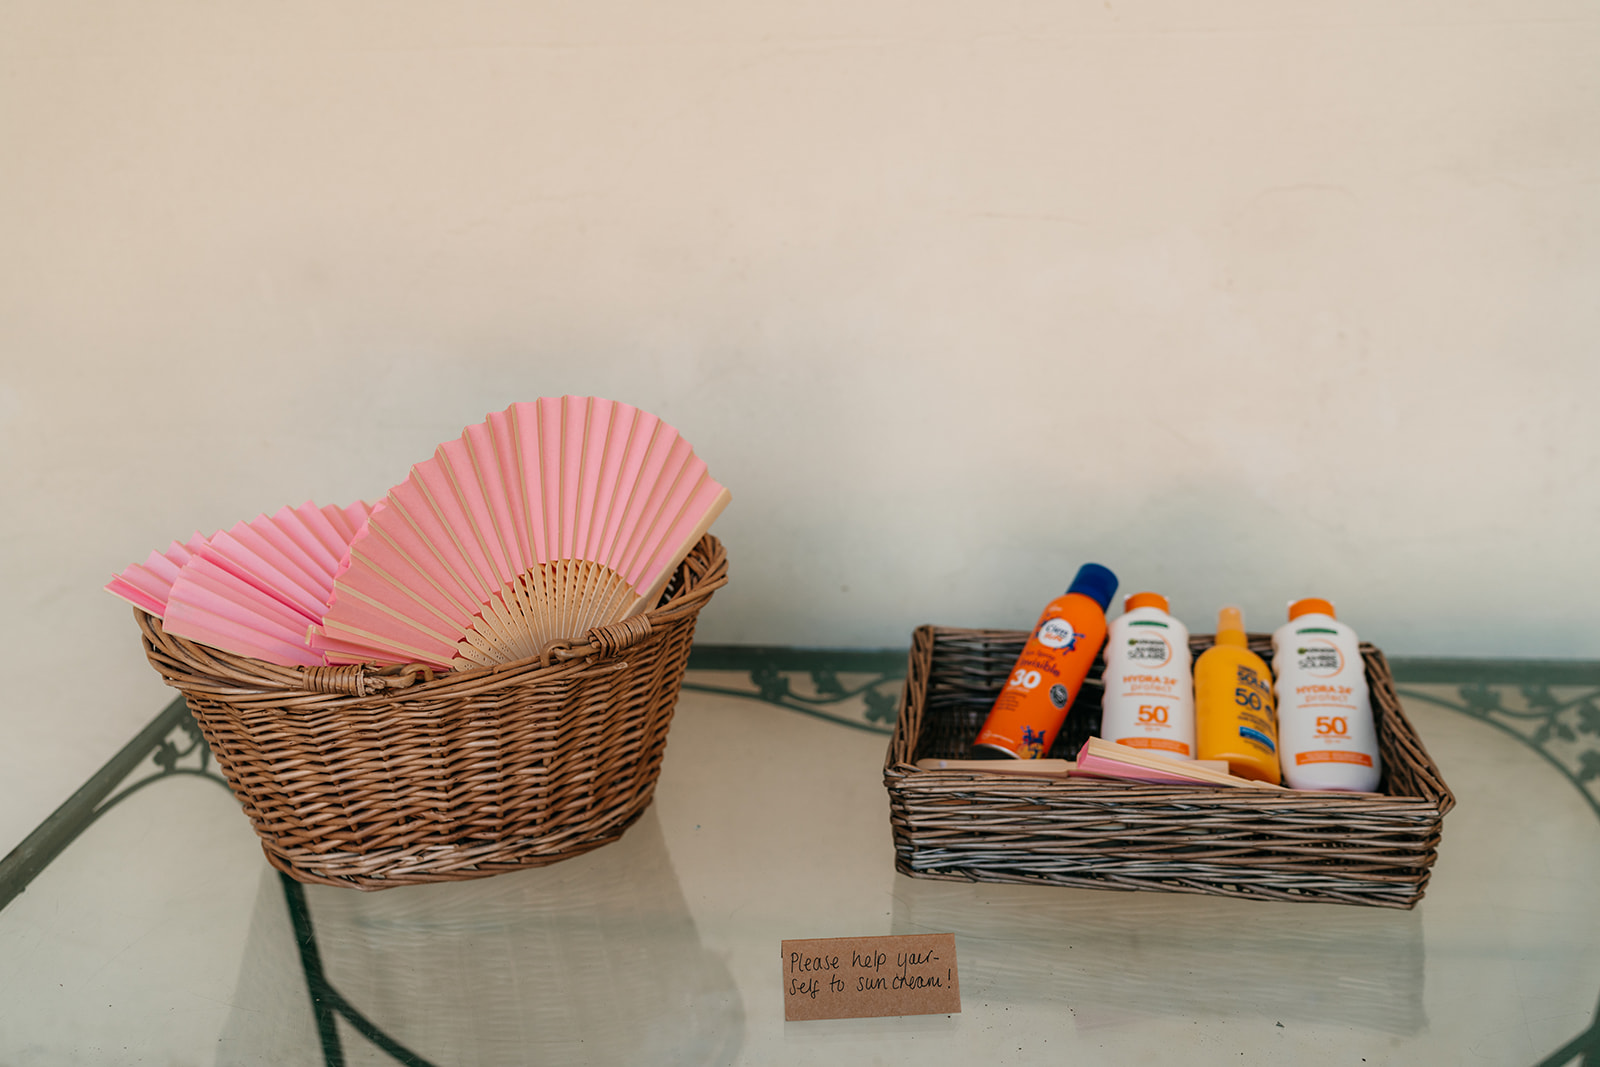 Wedding details. Fans and suncream ready for a warm wedding day here in the UK